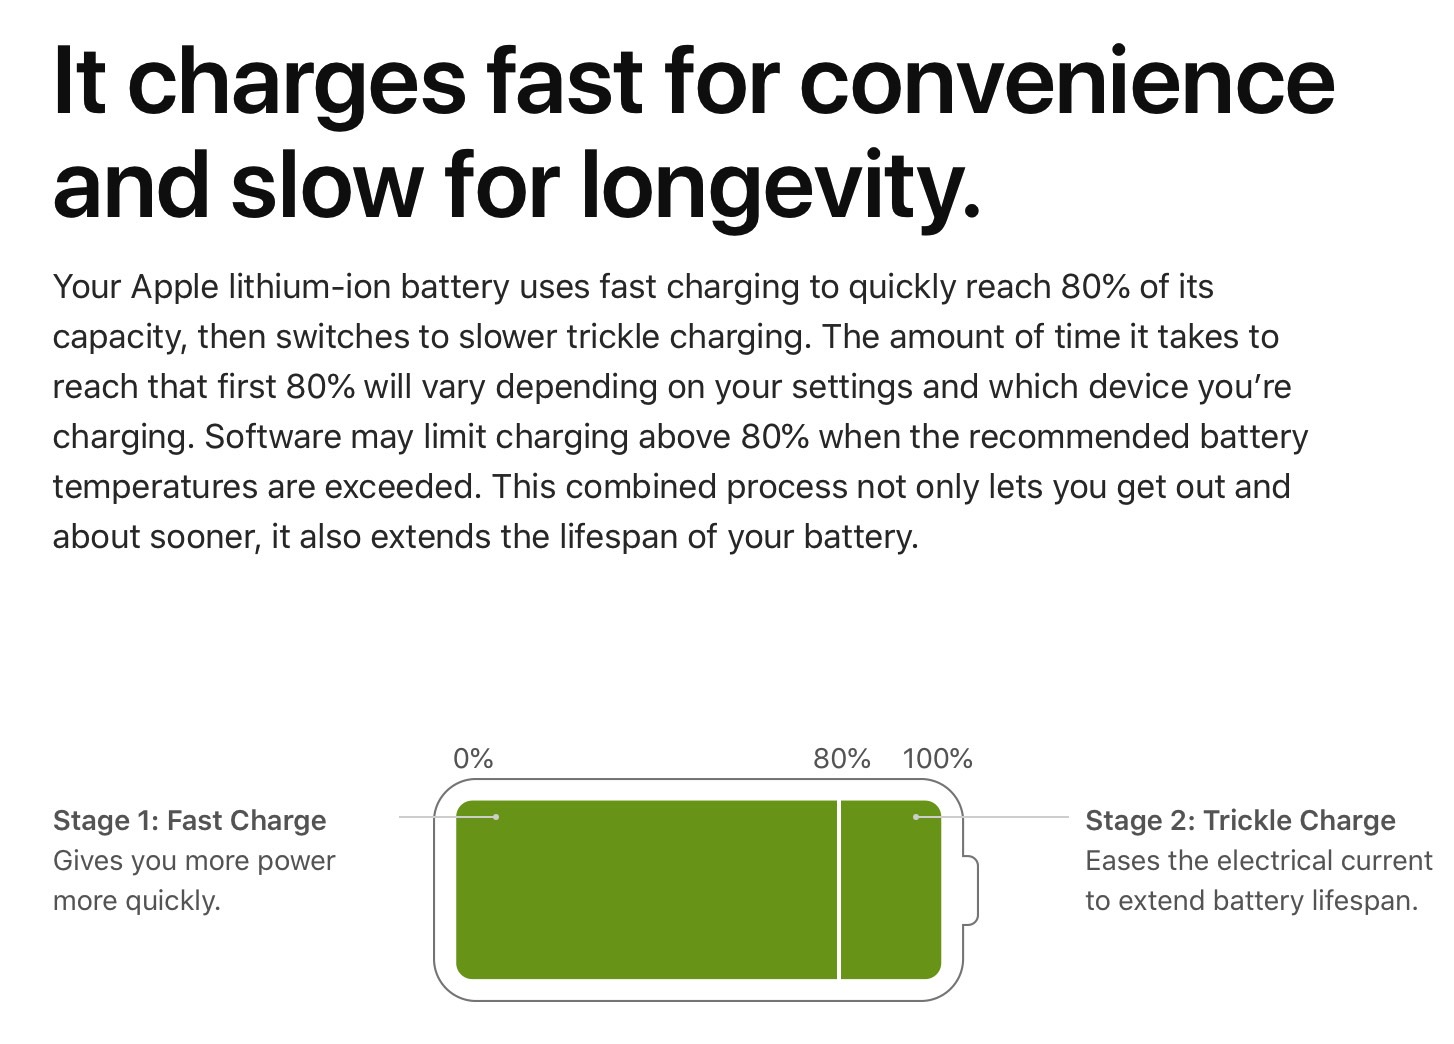 How fast-charging works on Apple devices.